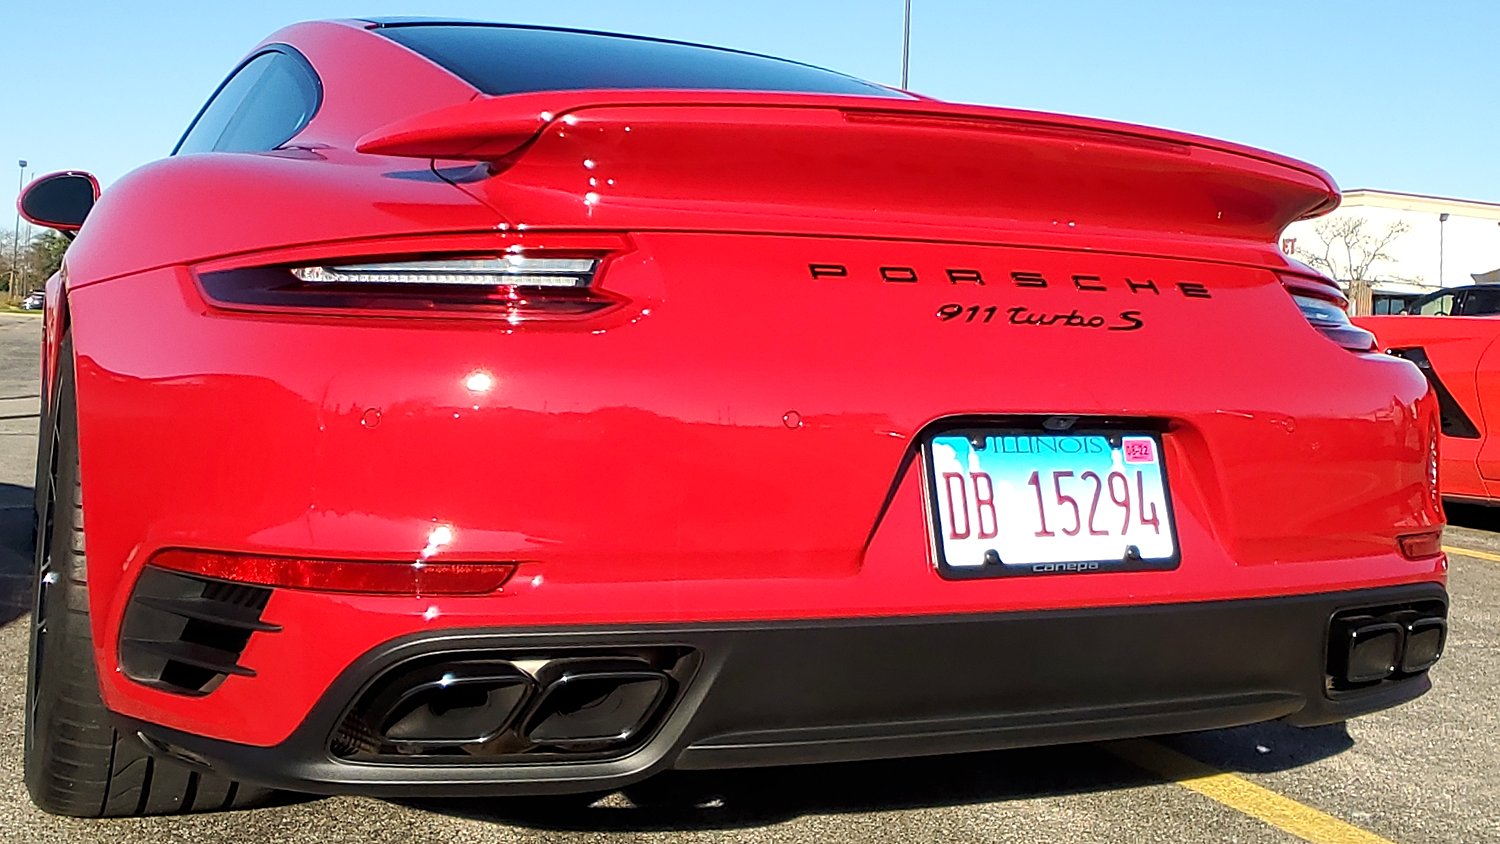 Tail end of Porsche 911 Turbo S.